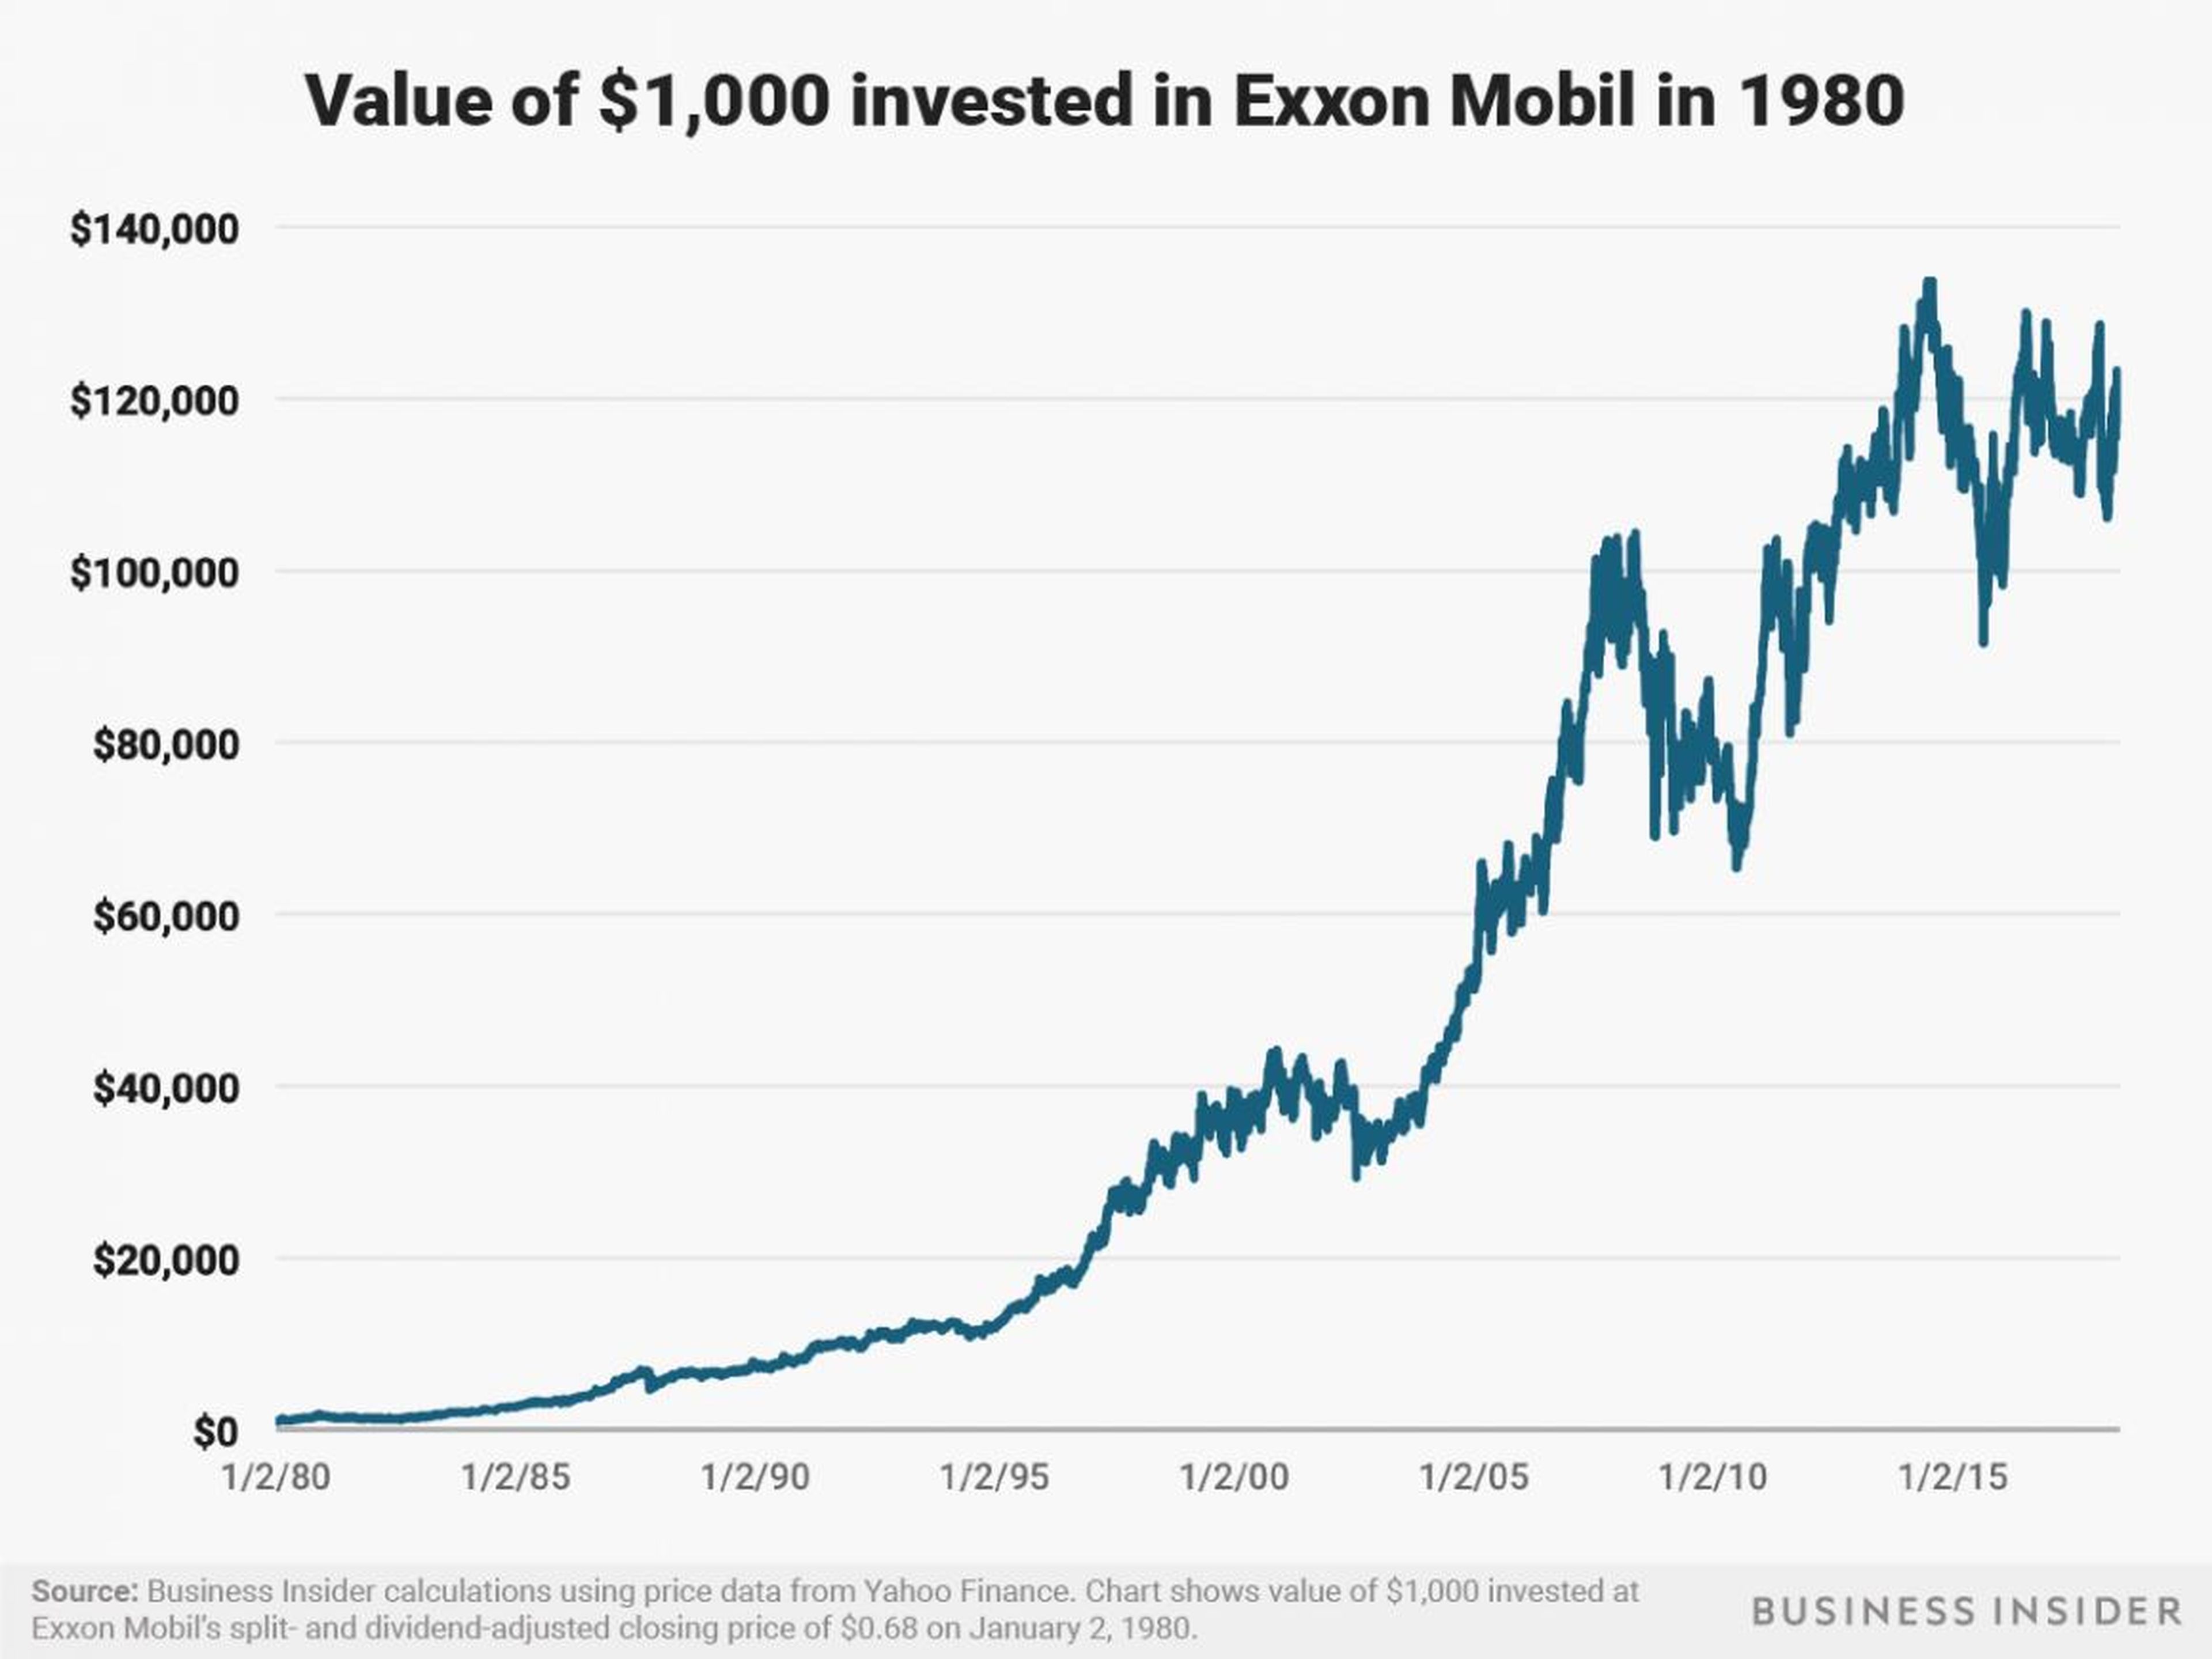 $1,000 invested in Exxon Mobil at the start of 1980 would be worth about $121,000 today.